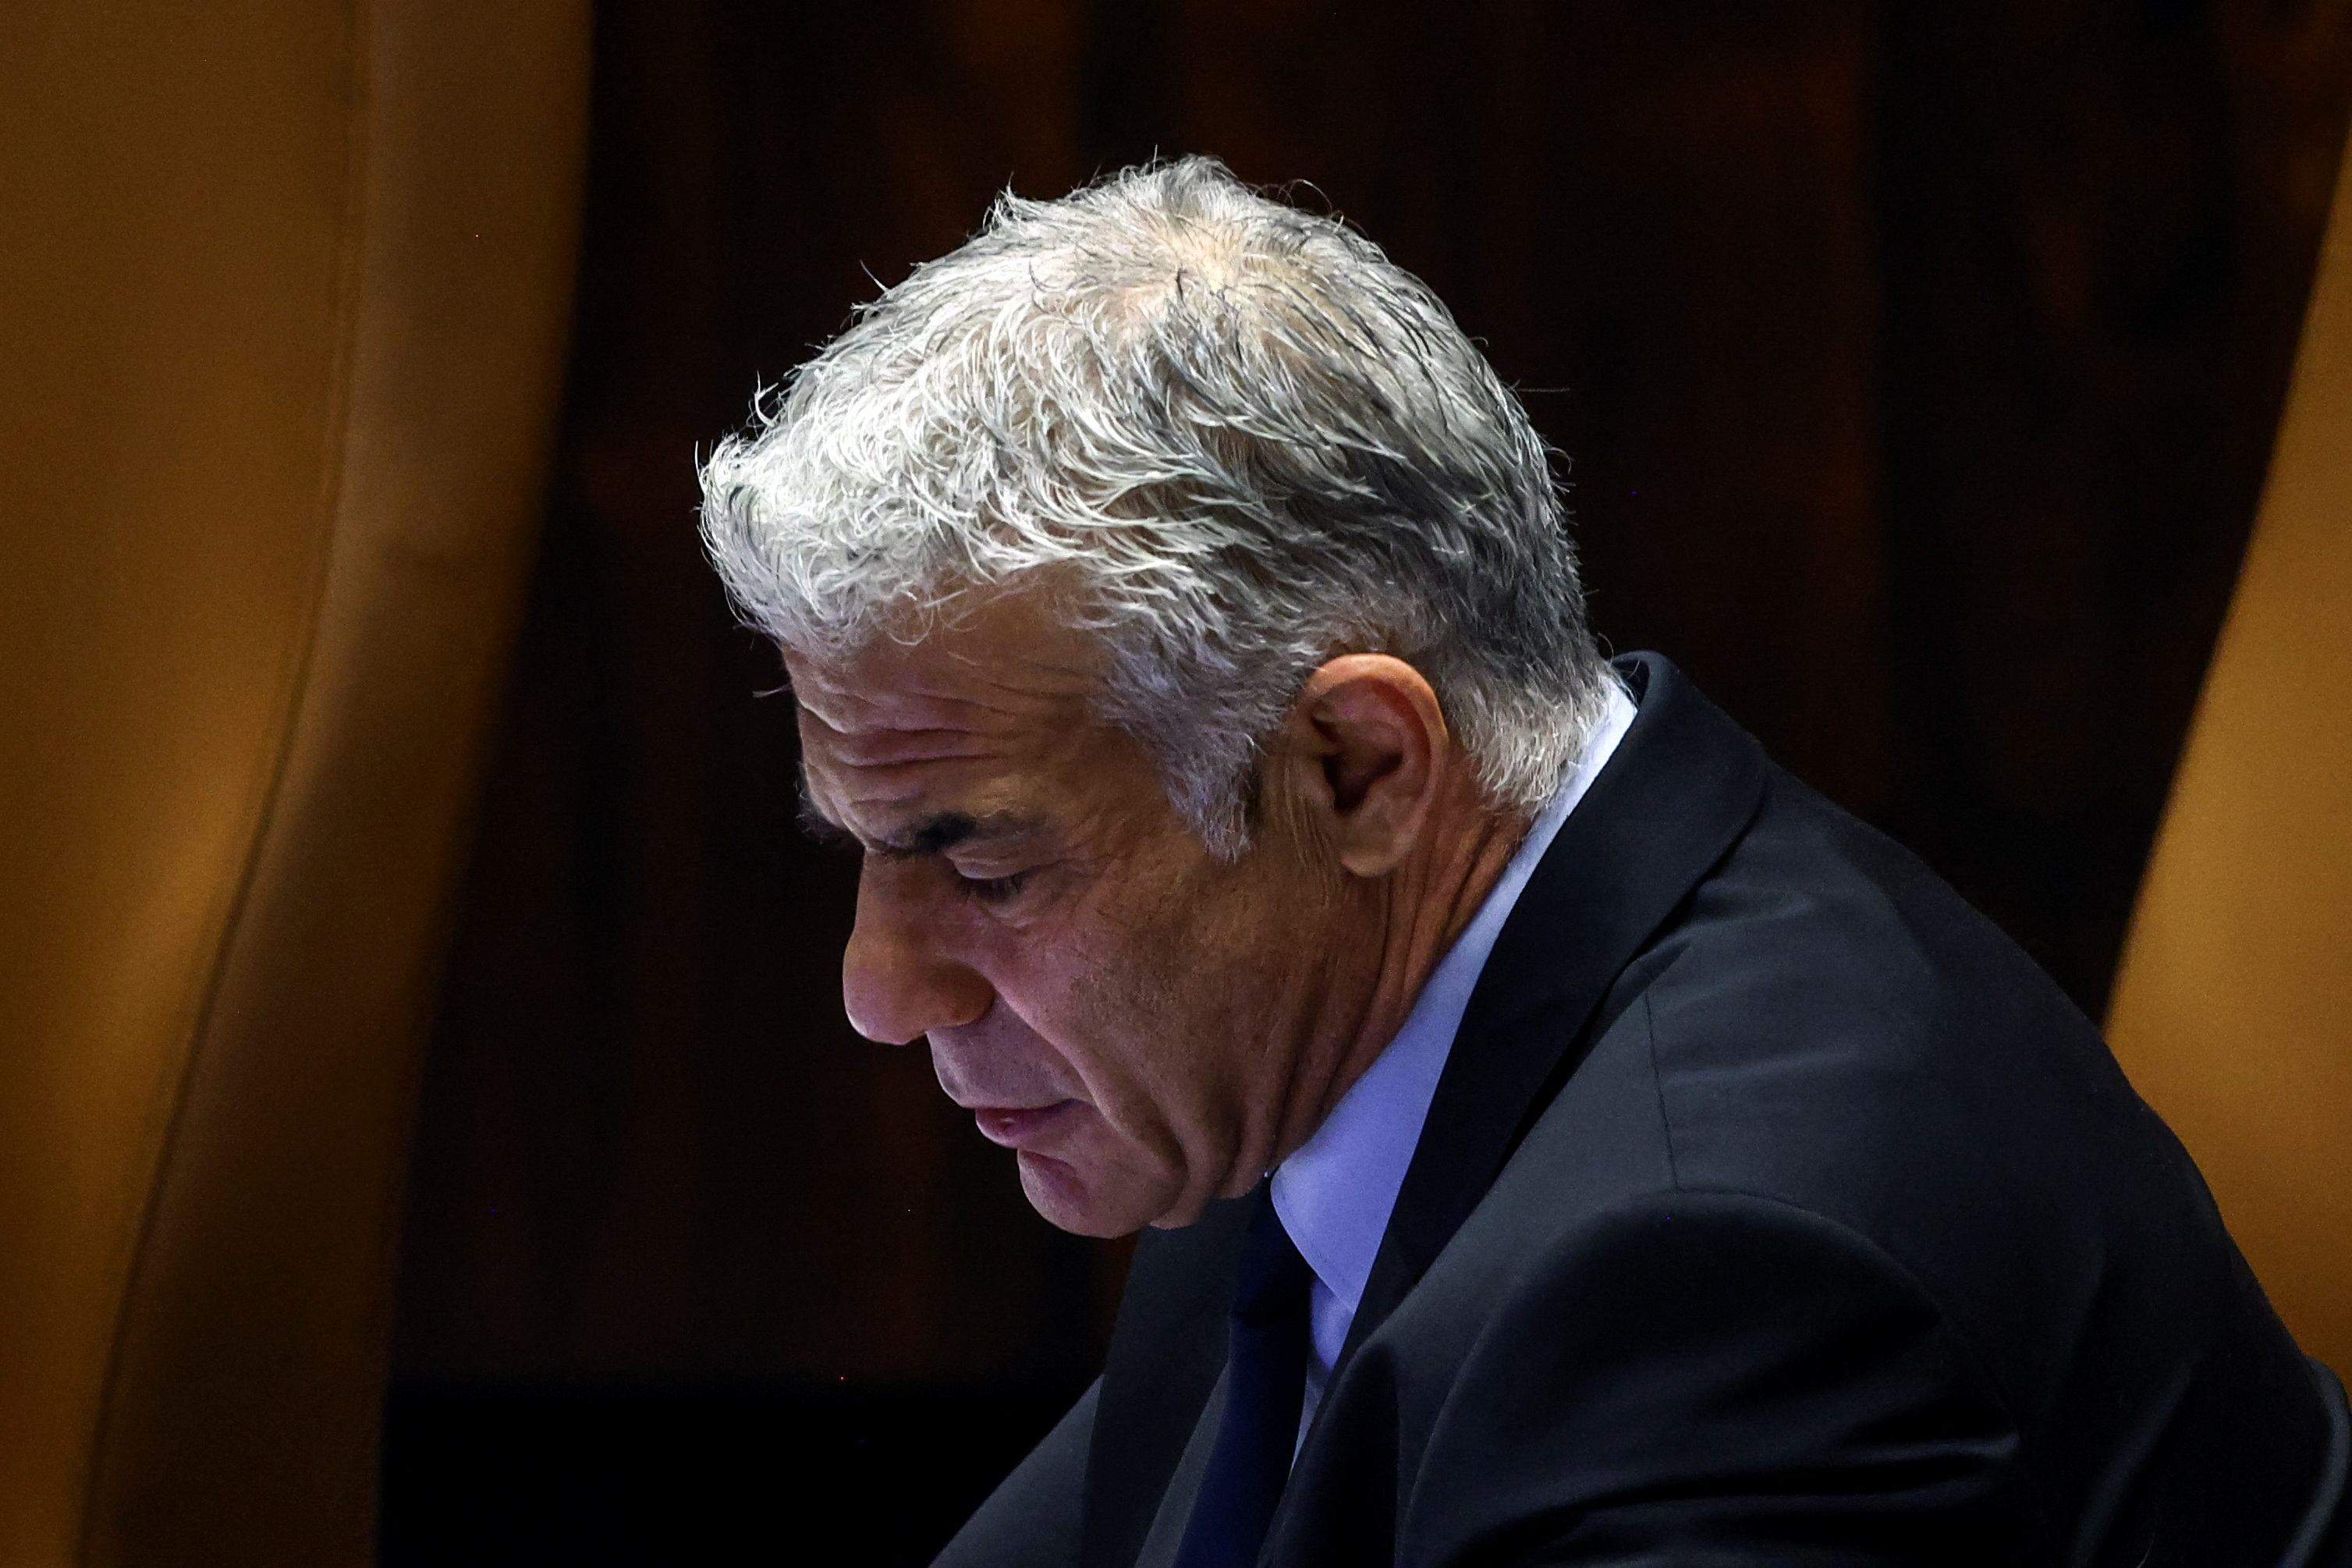 Foreign Minister Yair Lapid will take over as prime minister of an interim government